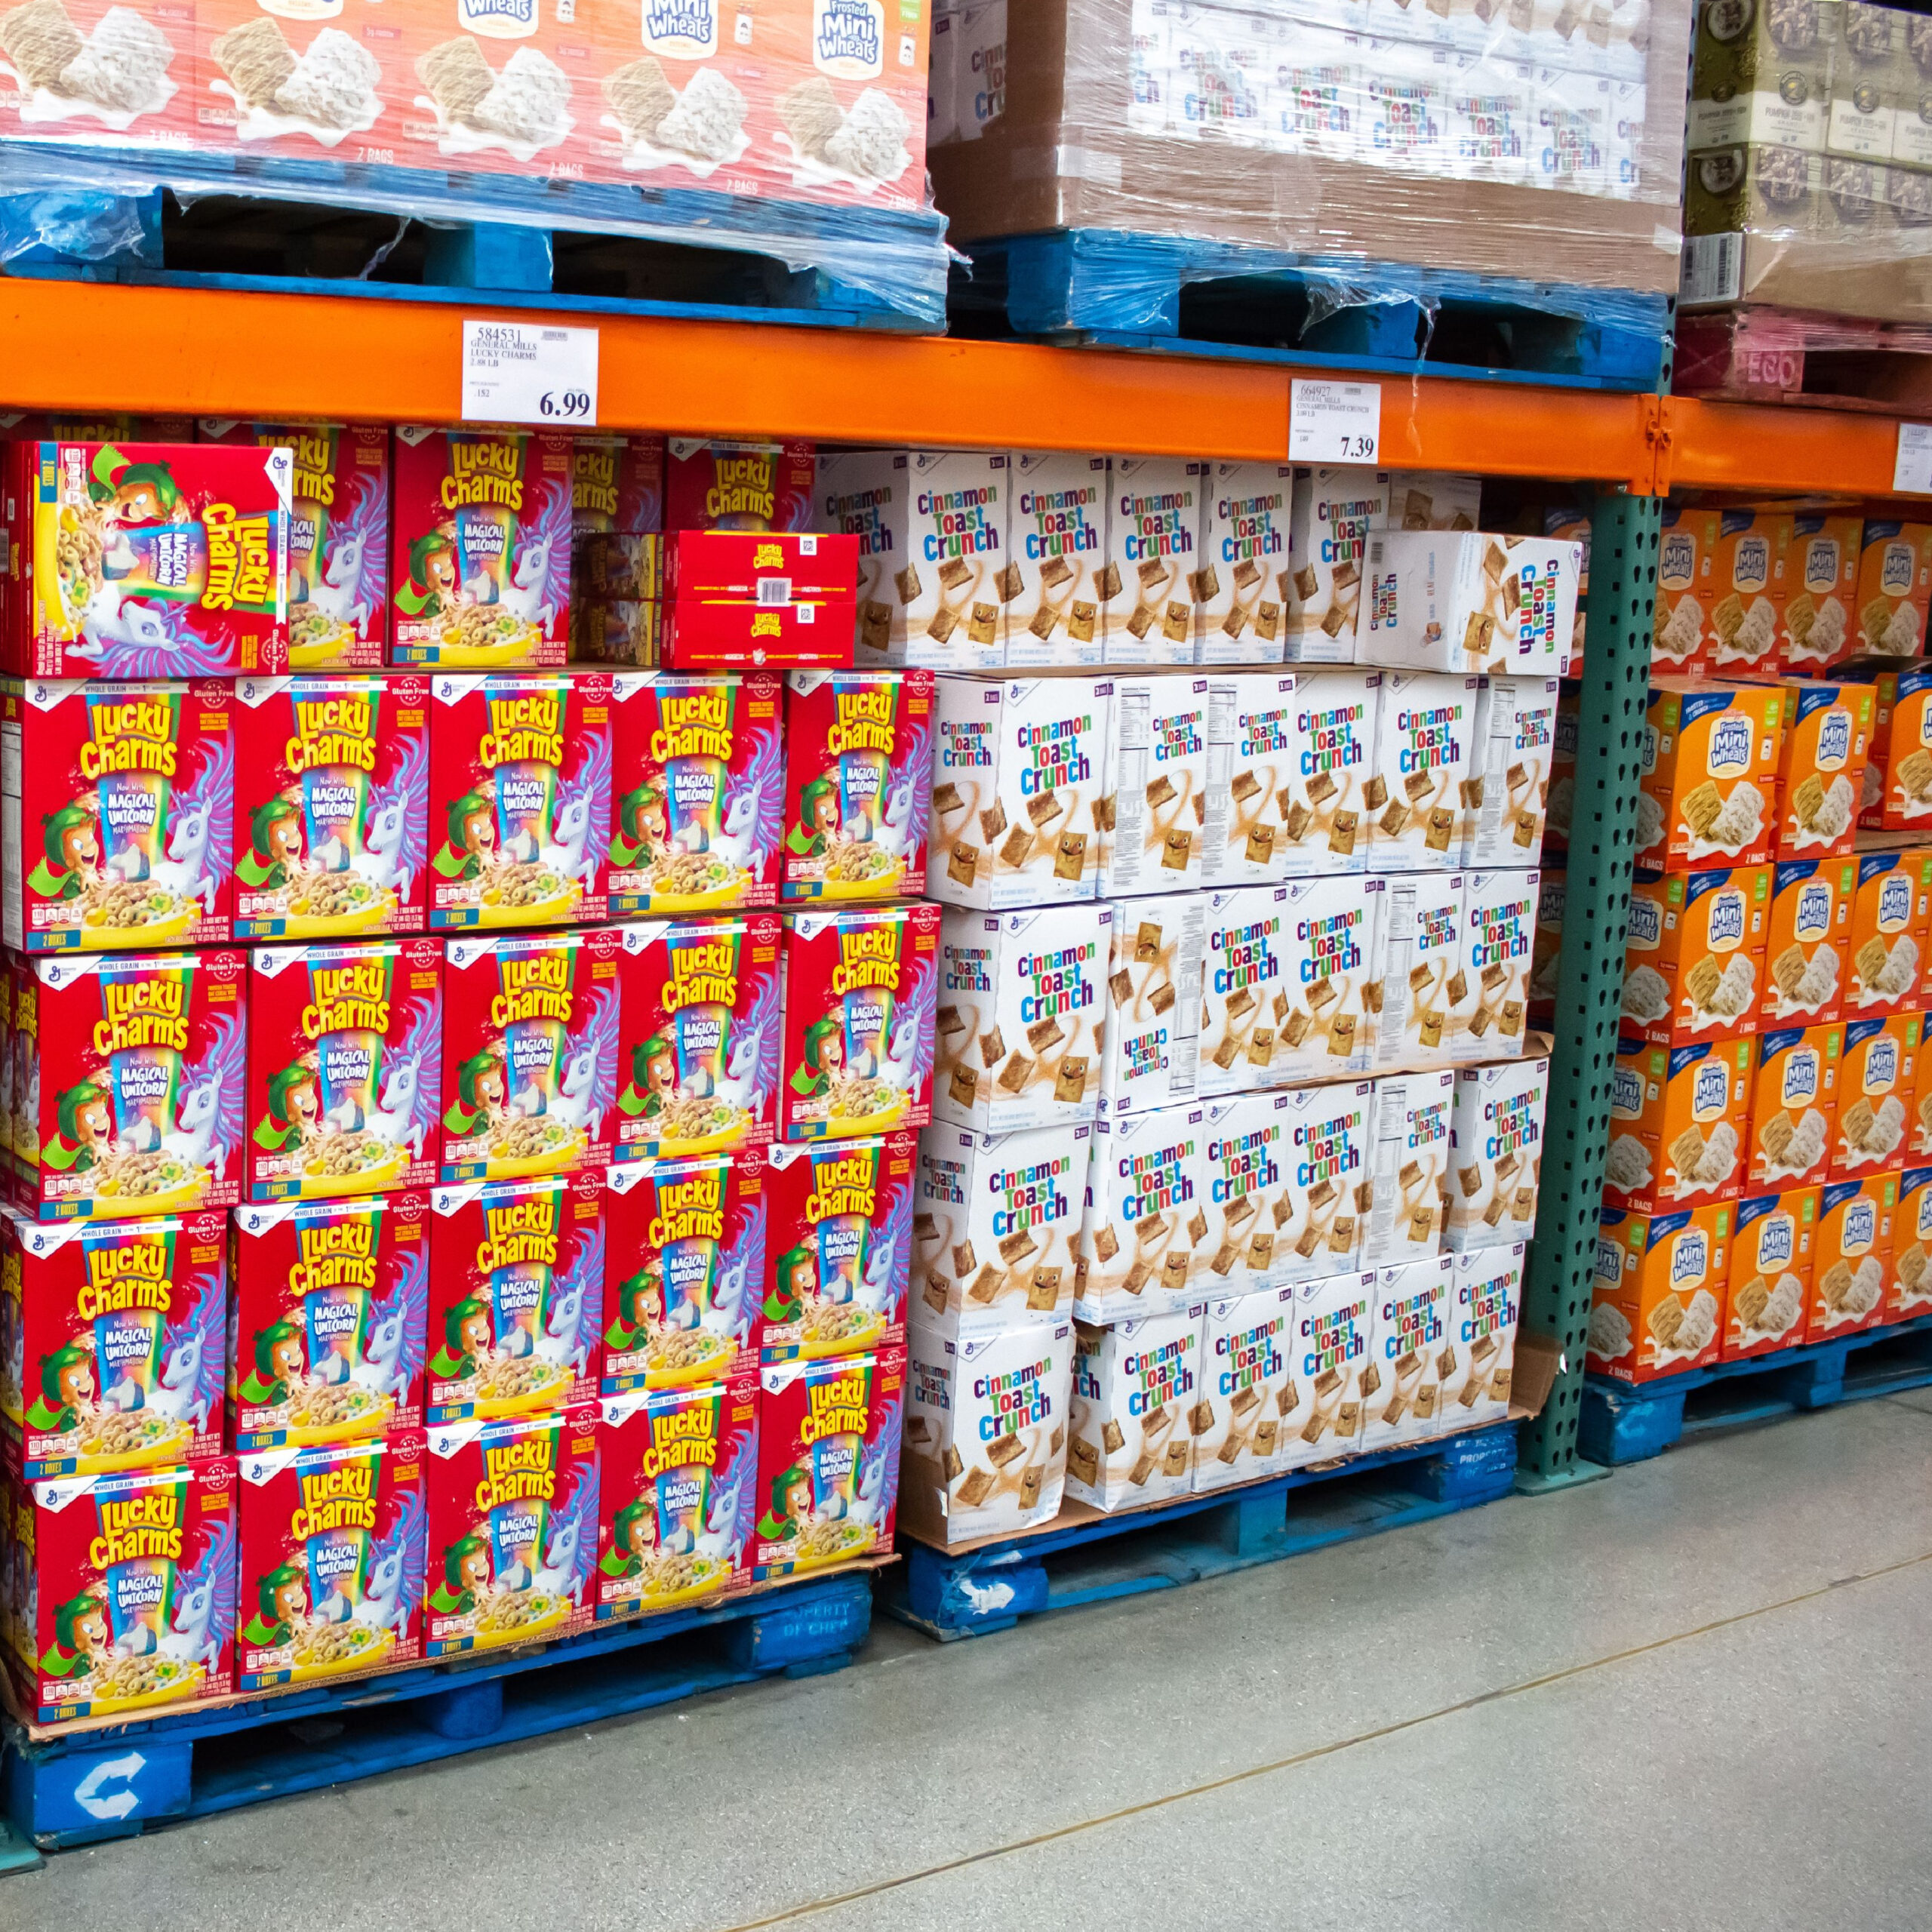 7 Things You Should NEVER Buy at Costco, According to a Shopping